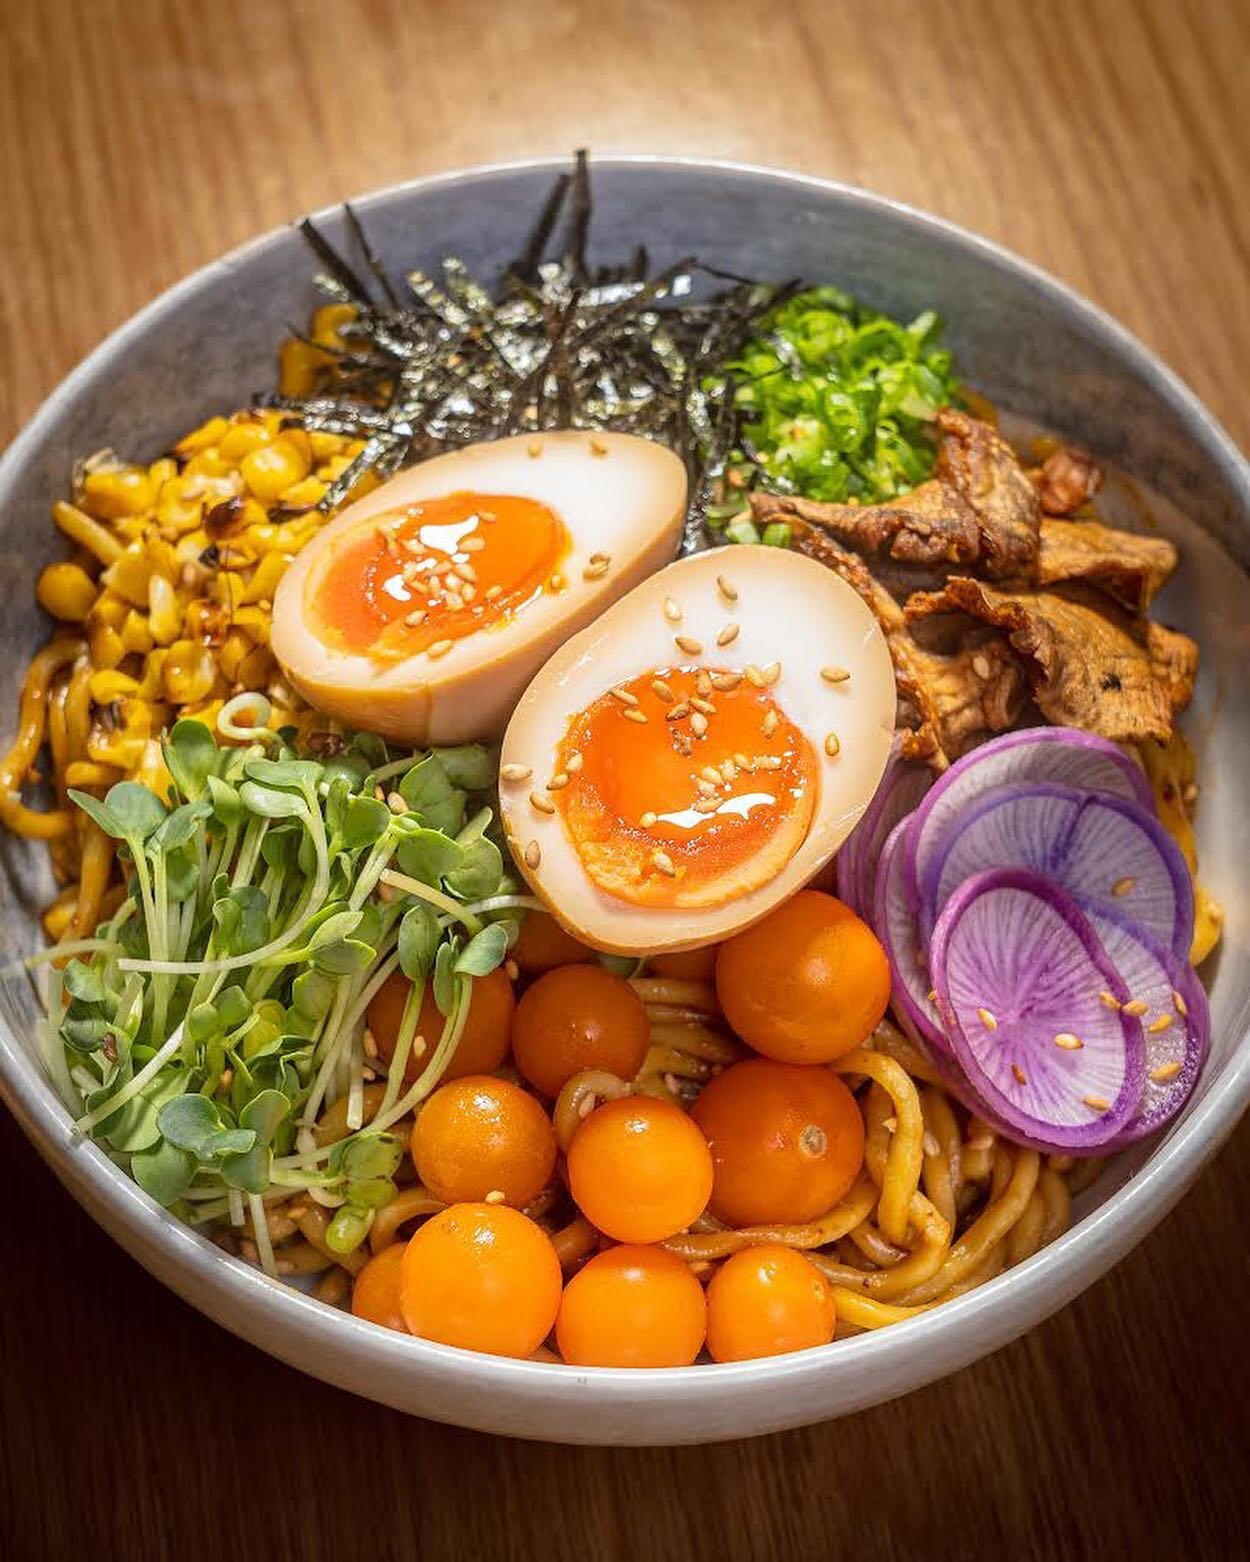 Nothing hits like some cold noodles during a heatwave ☀️ 

Our recent iteration of Hiyashi Chuka featuring our favorite @sunnoodles &amp; this summer&rsquo;s bounty 🌽 🍅 with the most perfect jammy 🥚 by @chaep_dan 

📸 @iraedelmandp 

.
.
.

#losan